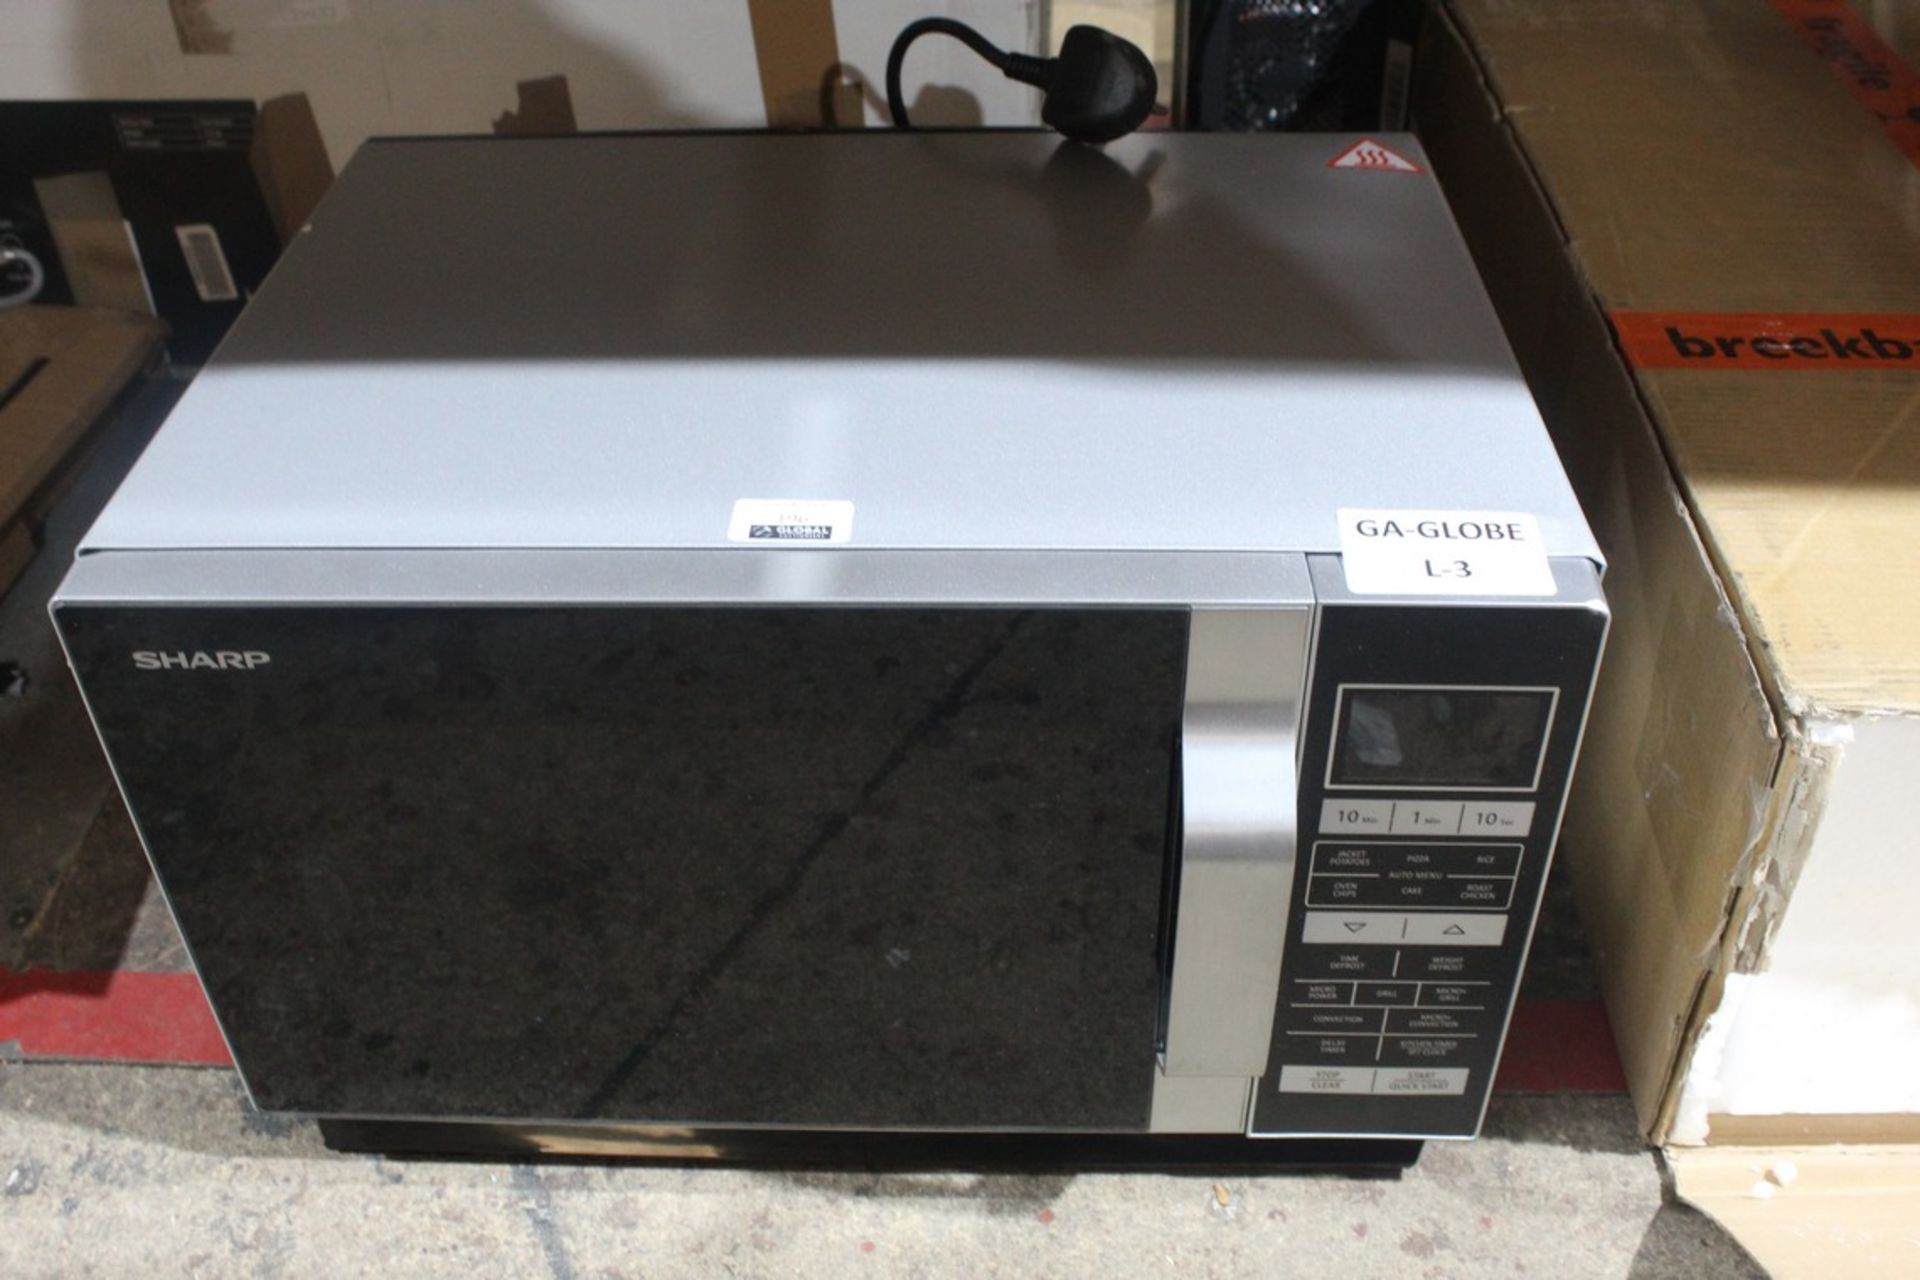 Sharpe Digital Counter Top Microwave Oven RRP £120 (Appraisals Available Upon Request) (Untested